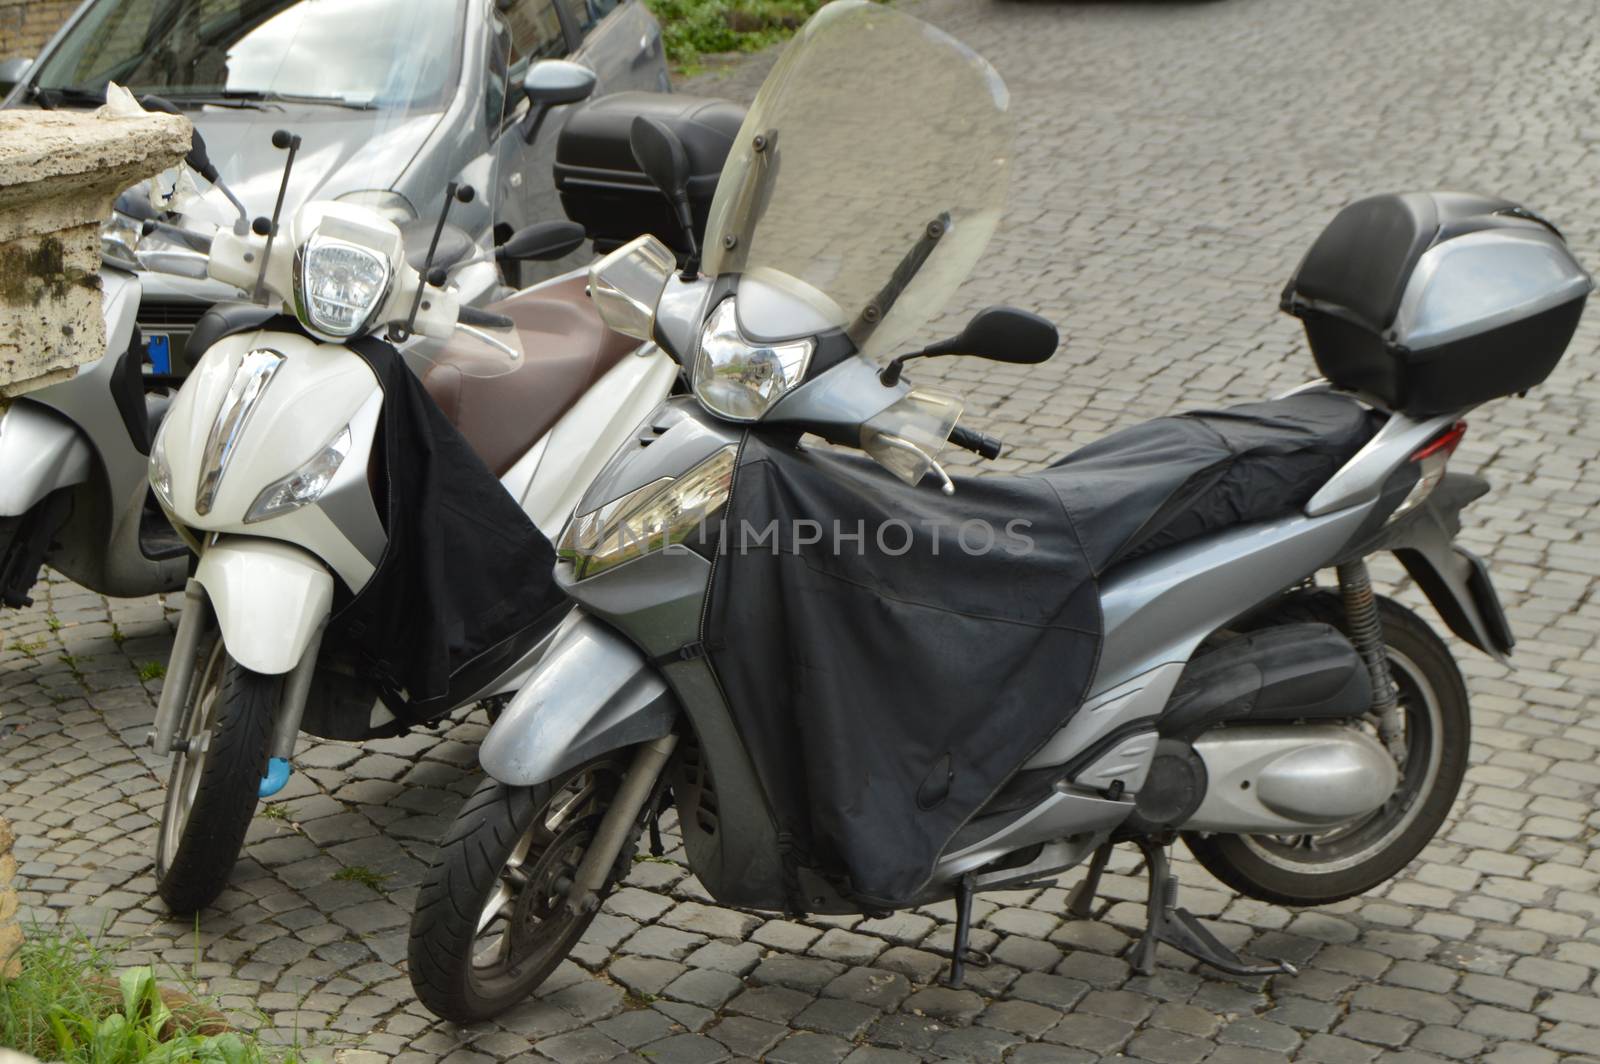 Two black motorcycles are parked on the street in Rome, Italy by claire_lucia